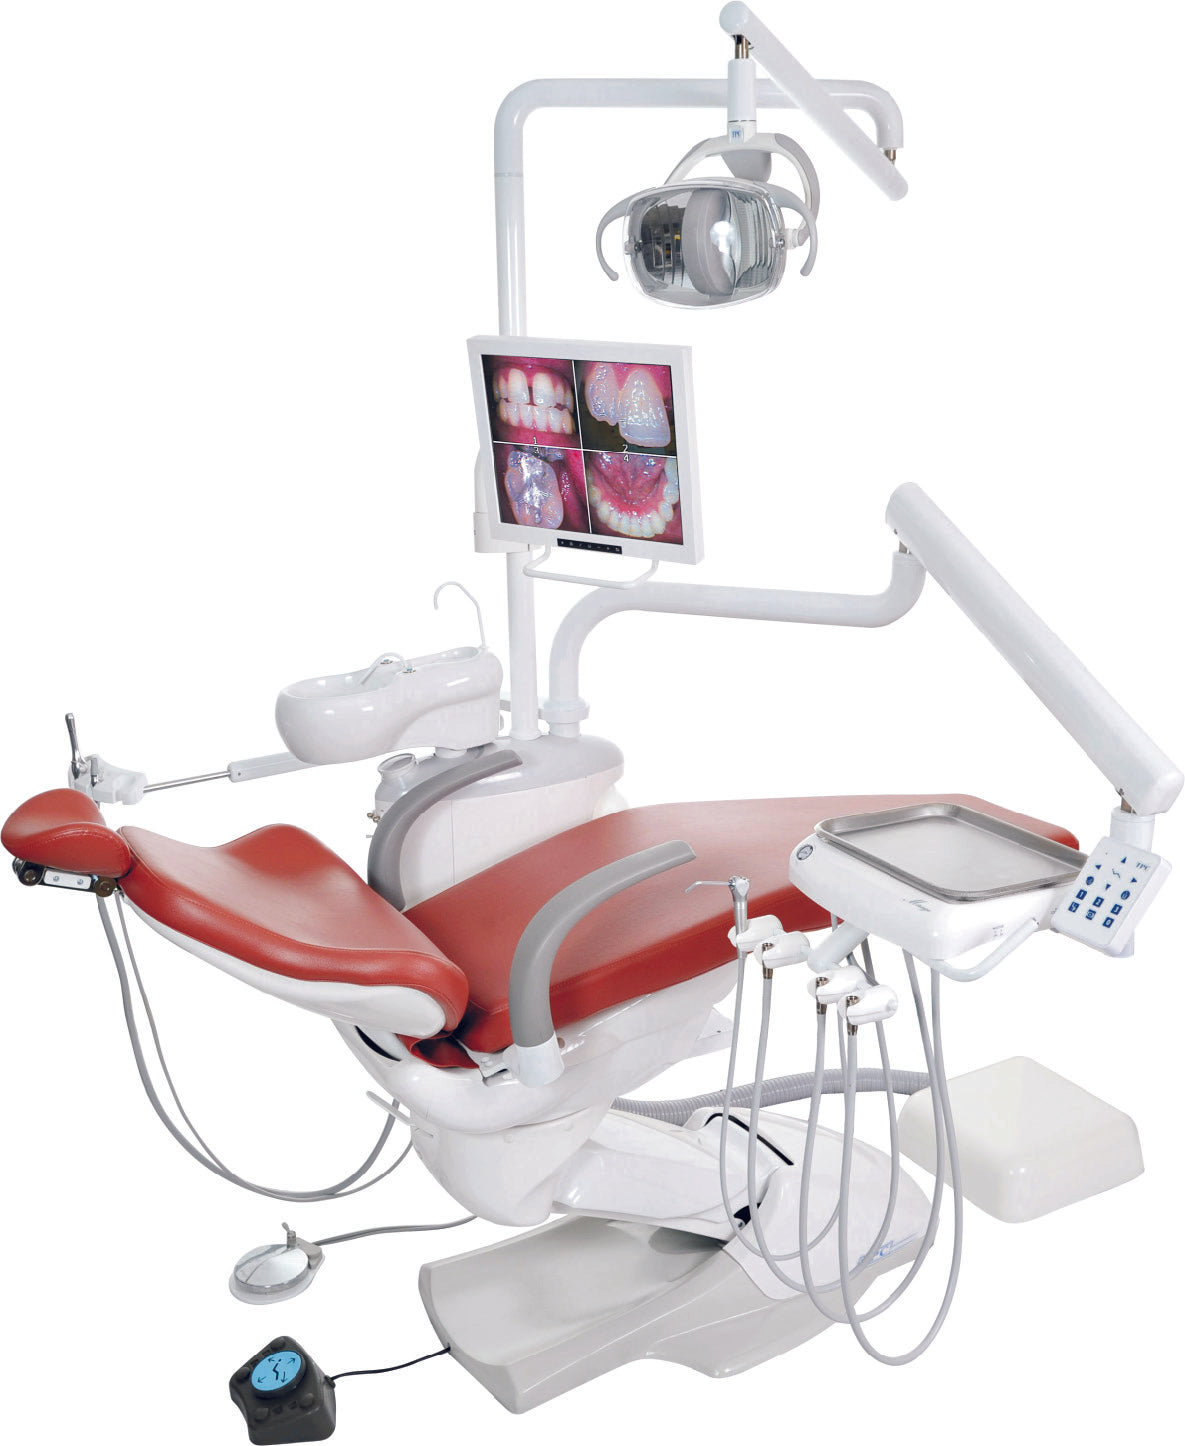 TPC Dental MP2000-550LED Mirage Operatory Package with Cuspidor